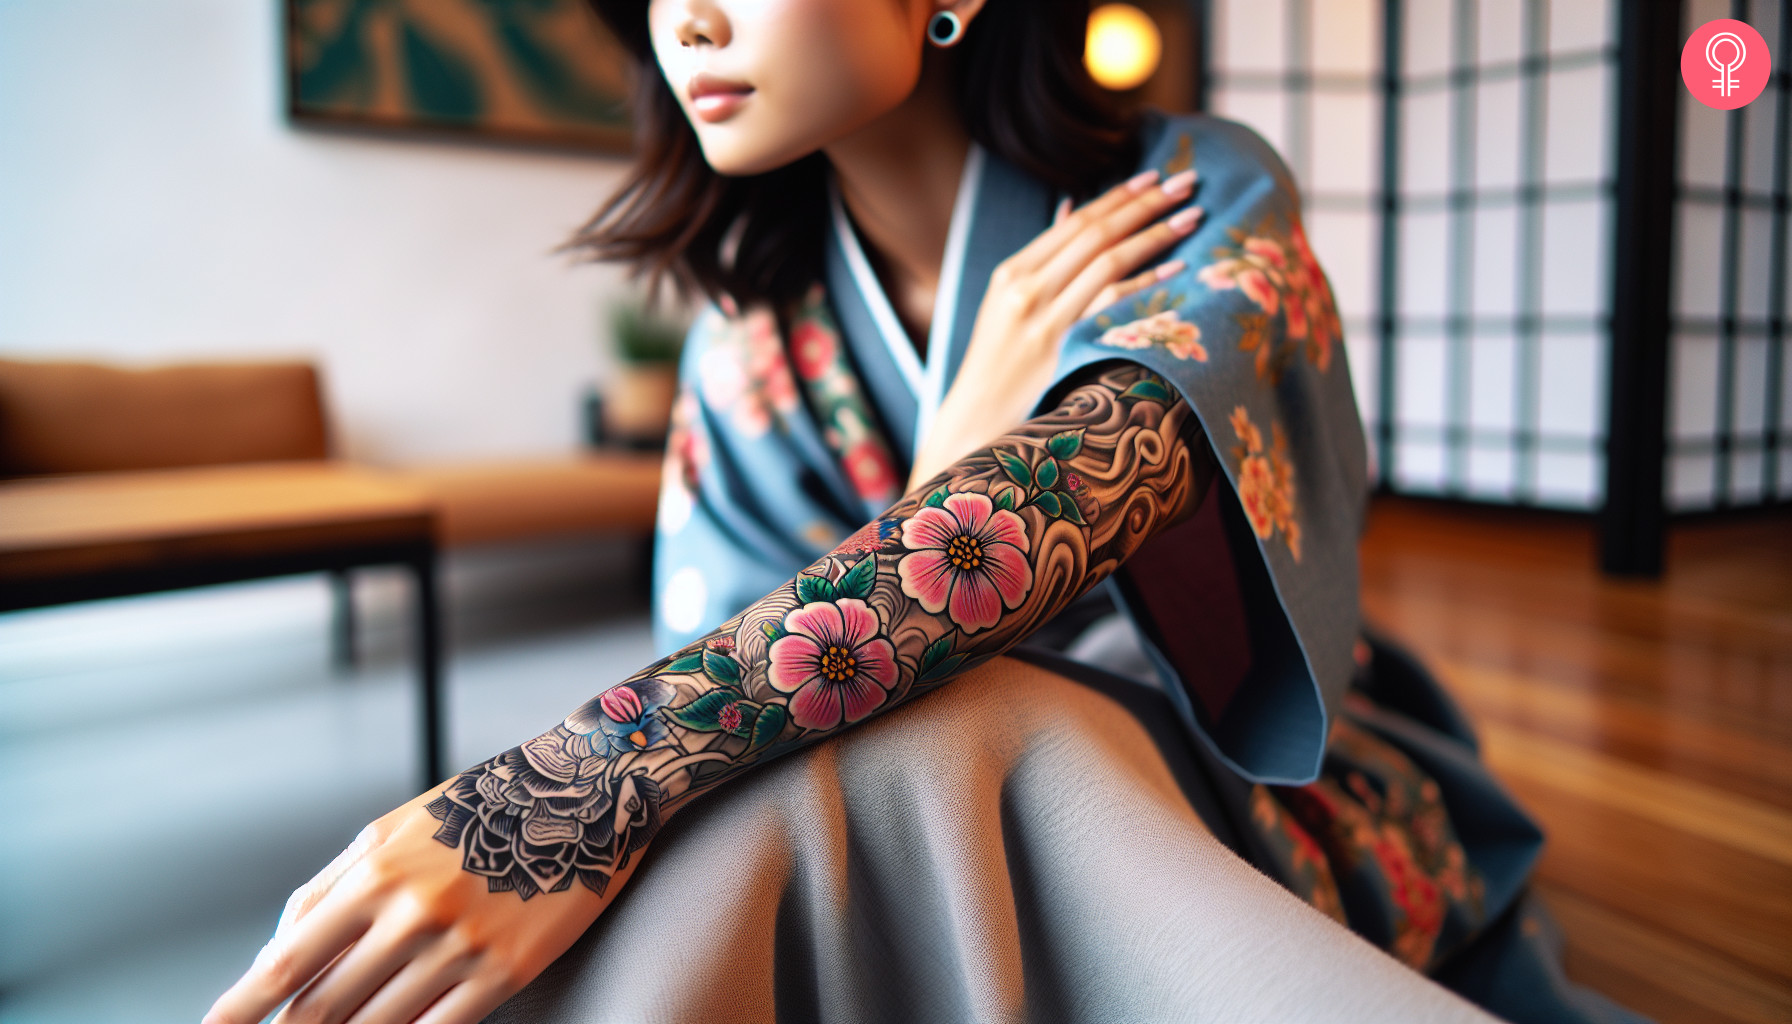 A woman with a traditional Korean tattoo on her sleeve